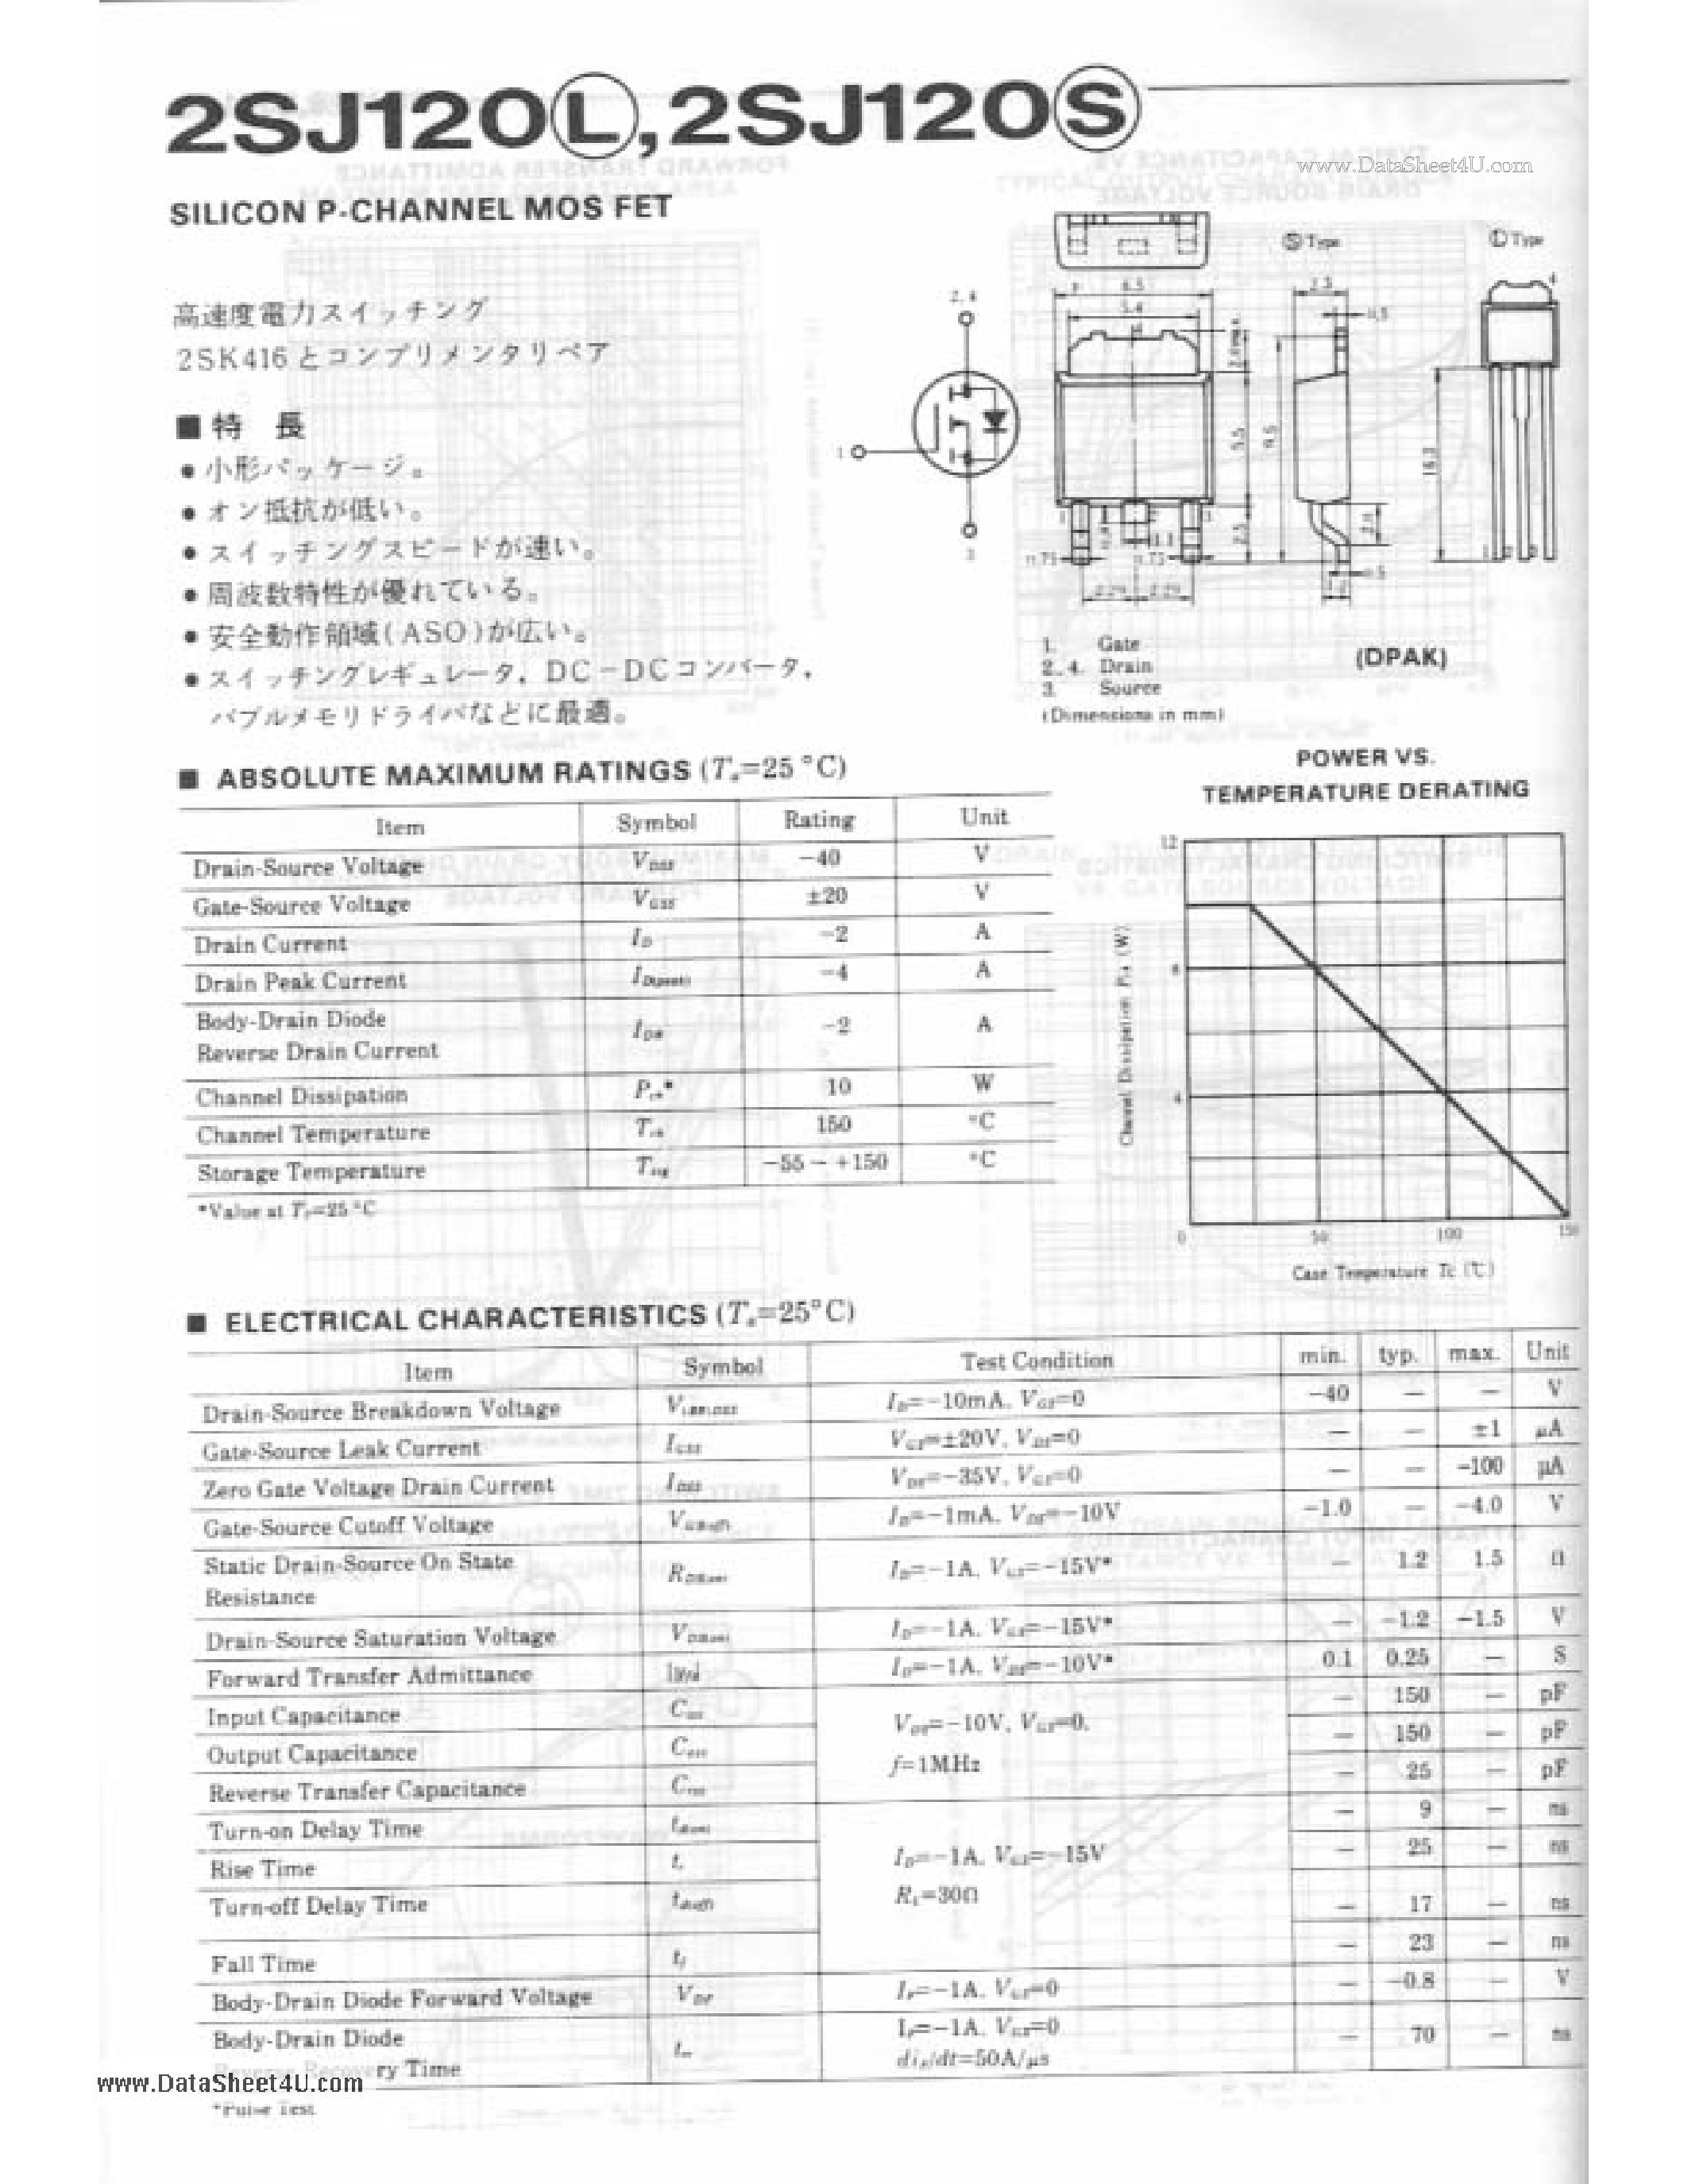 Datasheet 2SJ120 - Silicon P-channel MOS FET page 1